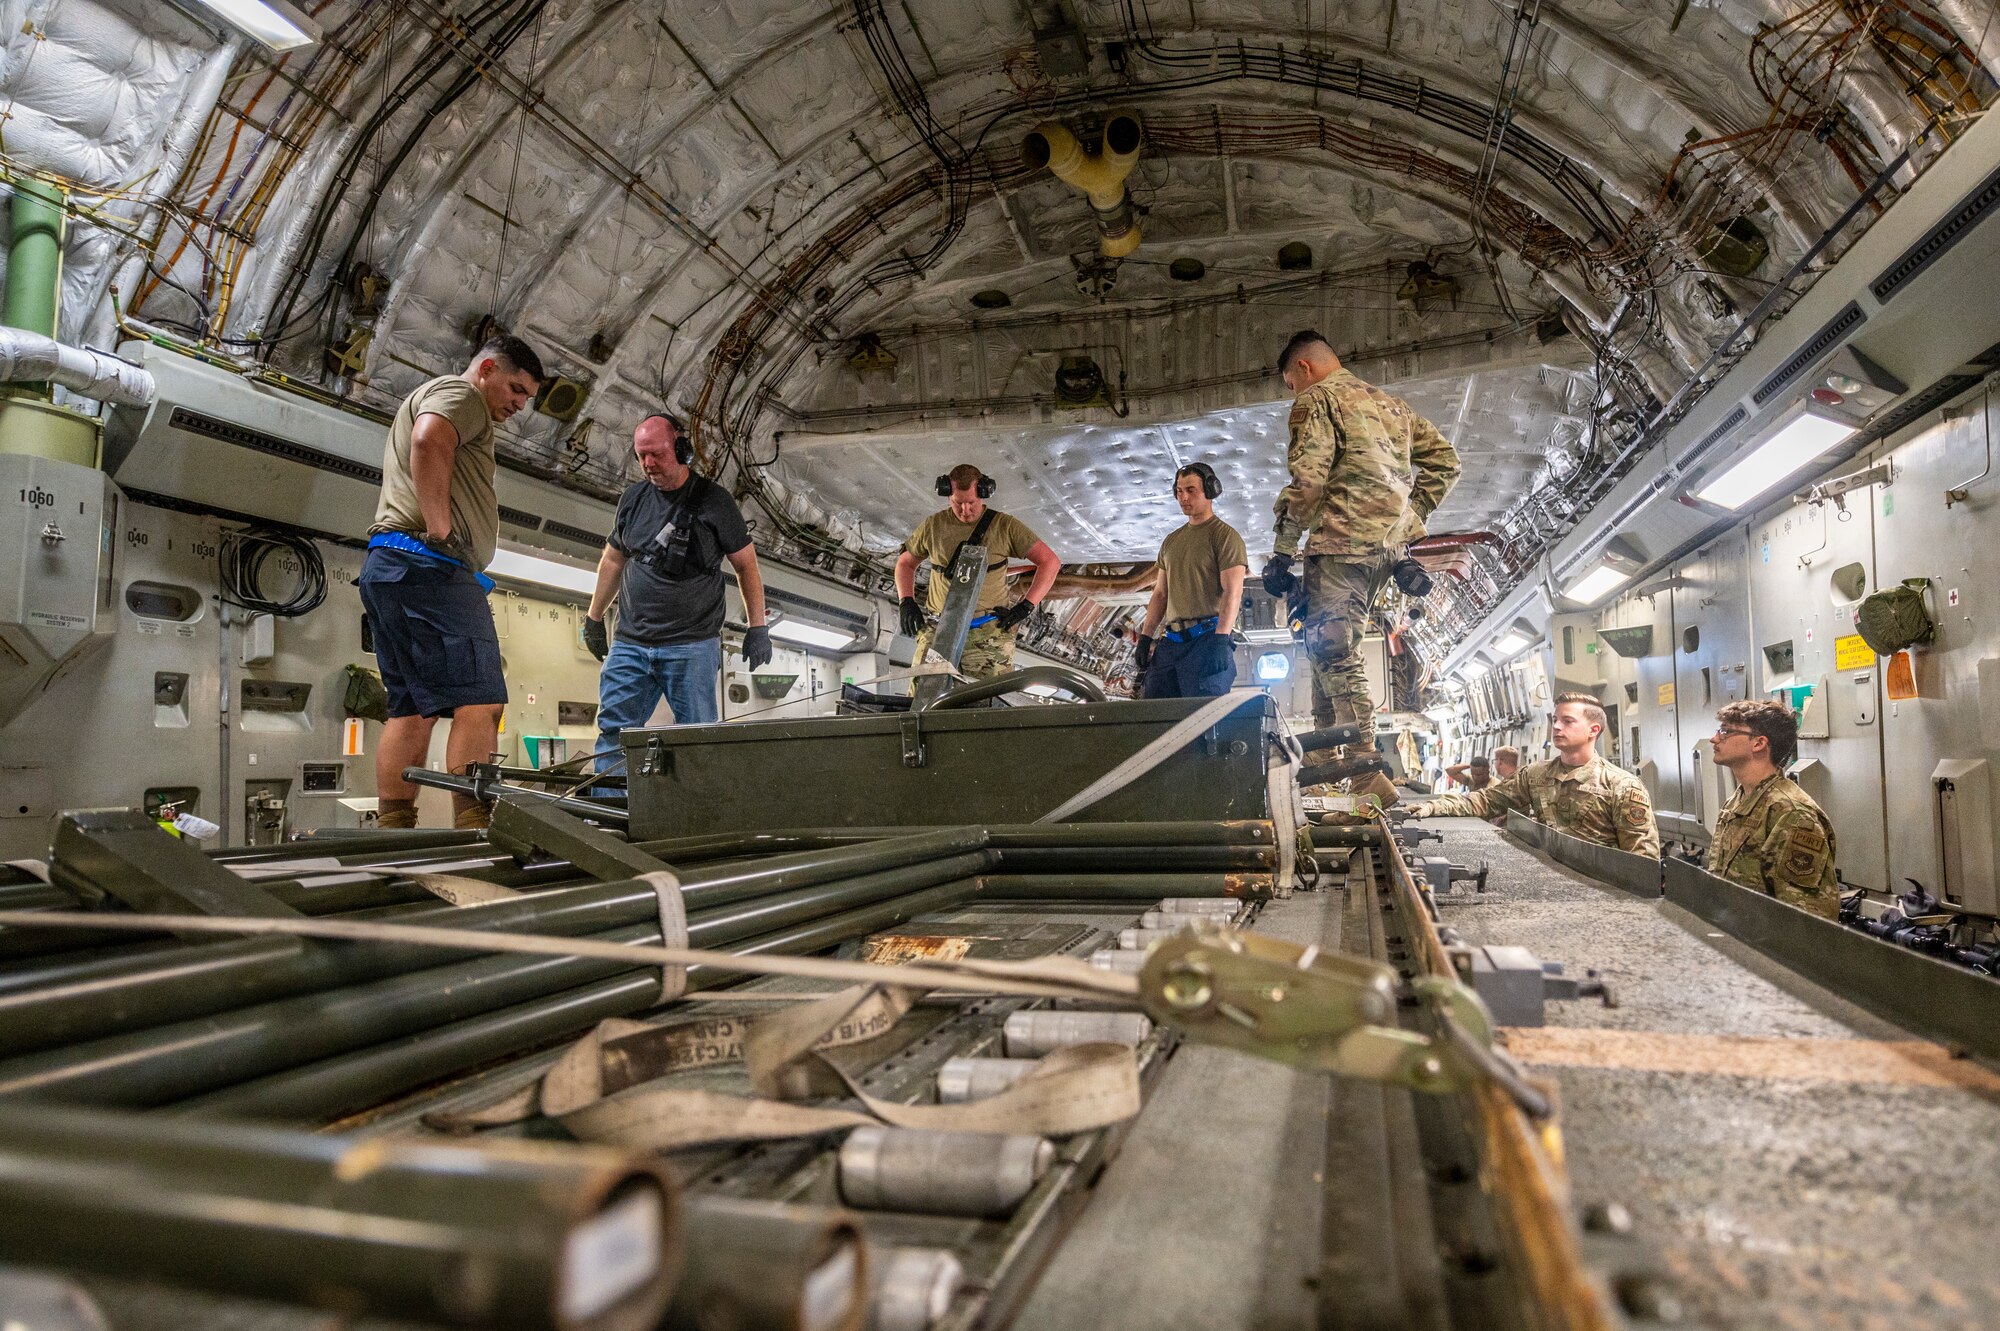 A group of men are around a large military vehicle that is used to load pallets on to large military aircraft, in side of a C-17 Globemaster III, a large Air Force aircraft.